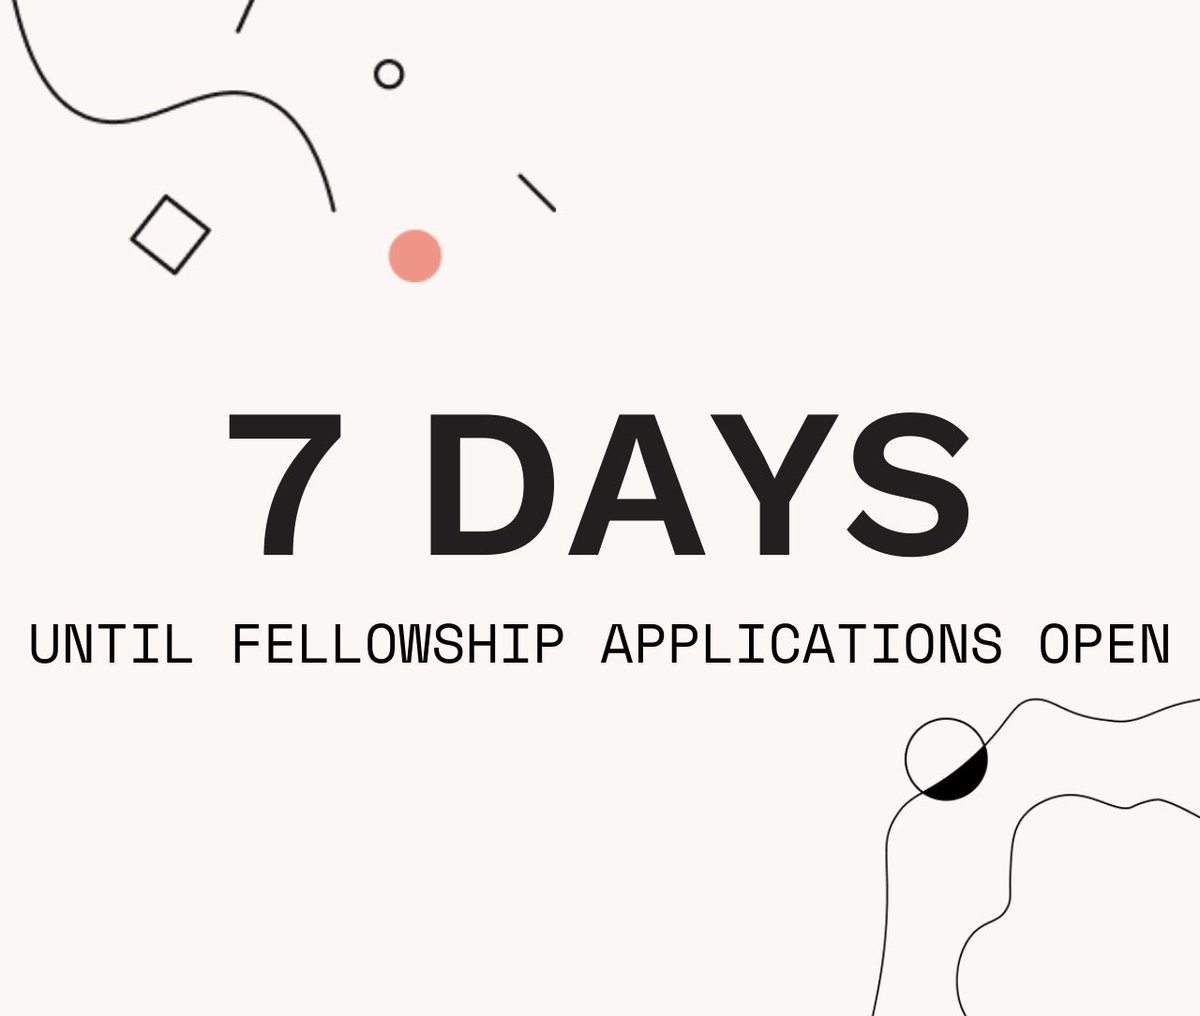 Calling all BIPOC and female founders: @visiblehandsvc is investing up to $200k and providing company-building support through our inaugural fellowship. ⏰Our application launch is ONE WEEK AWAY (3/29)⏰ Learn more or nominate candidates at visiblehands.vc.